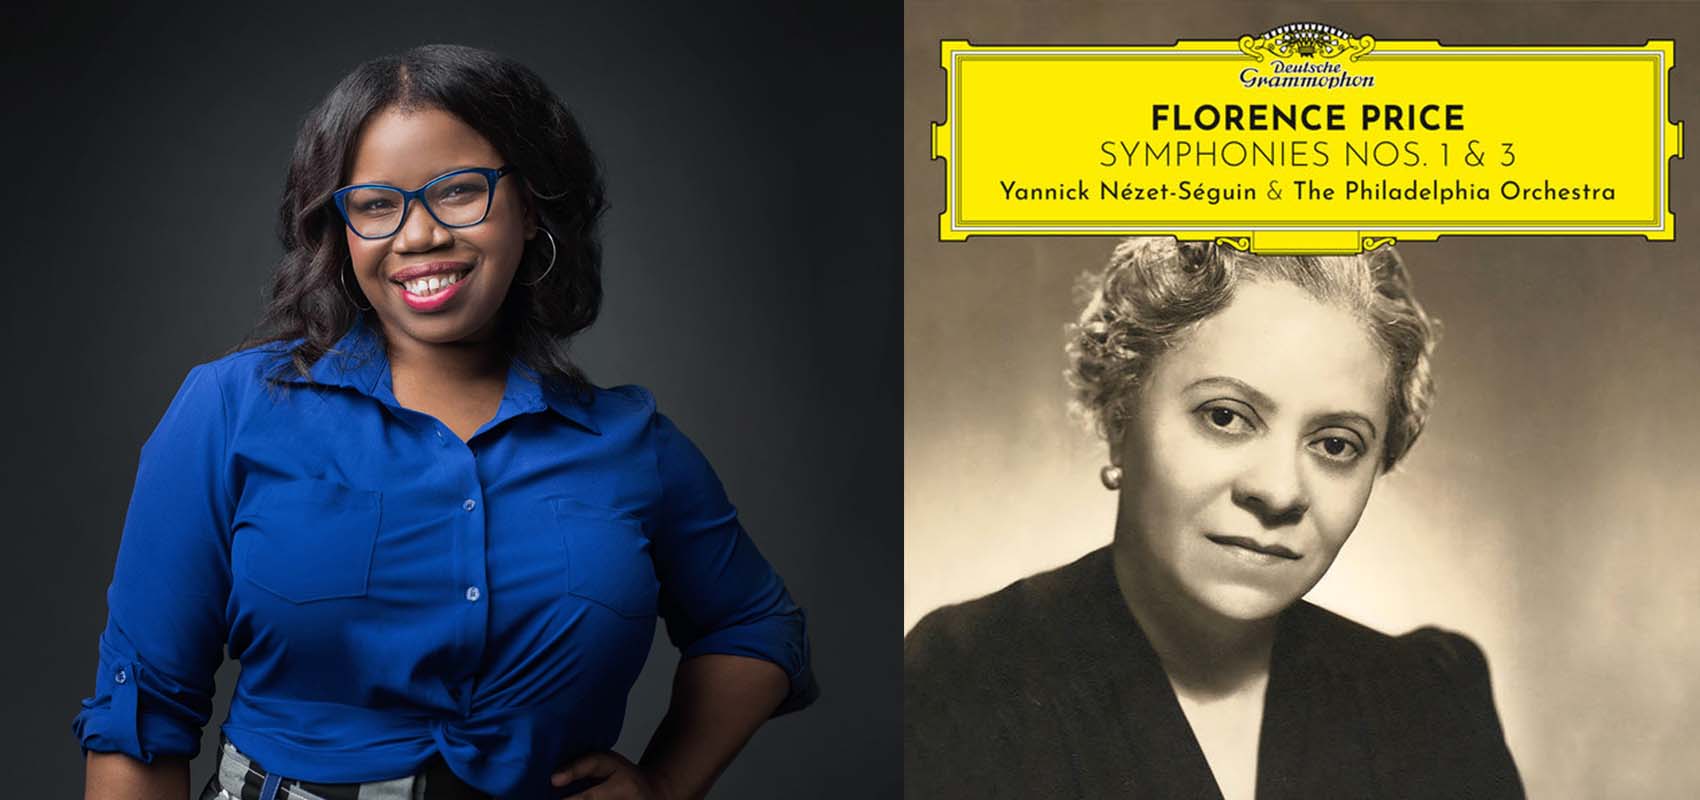 Headshot of Nicole Jordan, Principal Librarian of The Philadelphia Orchestra, next to the Orchestra's album cover of Florence Price's Symphonies No. 1 and 3